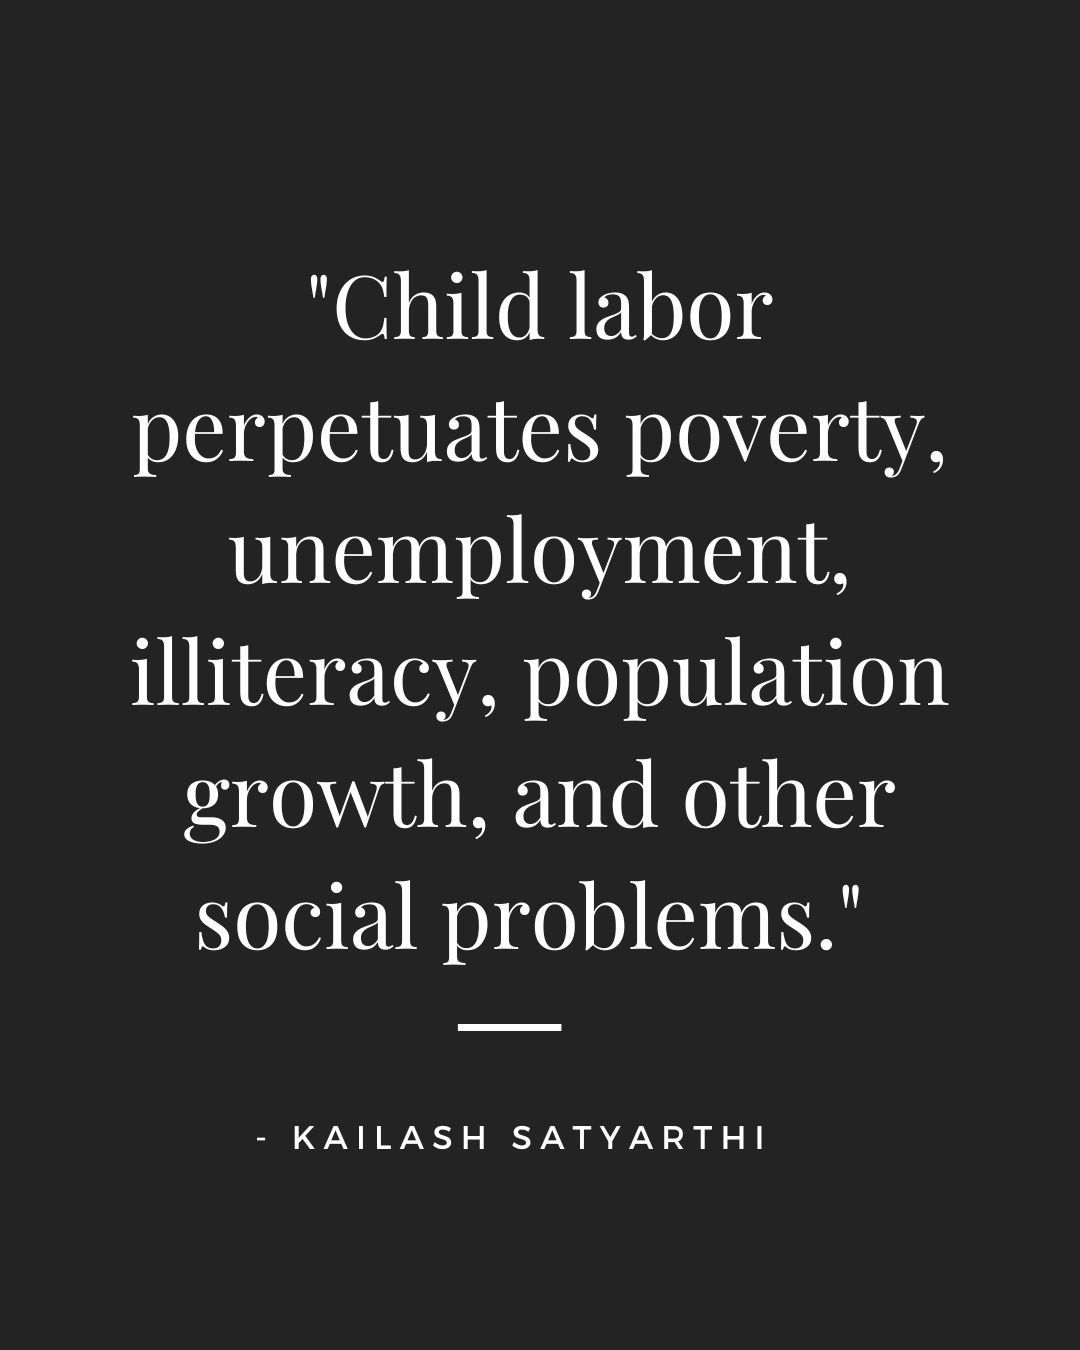 Quotes on Child Labour